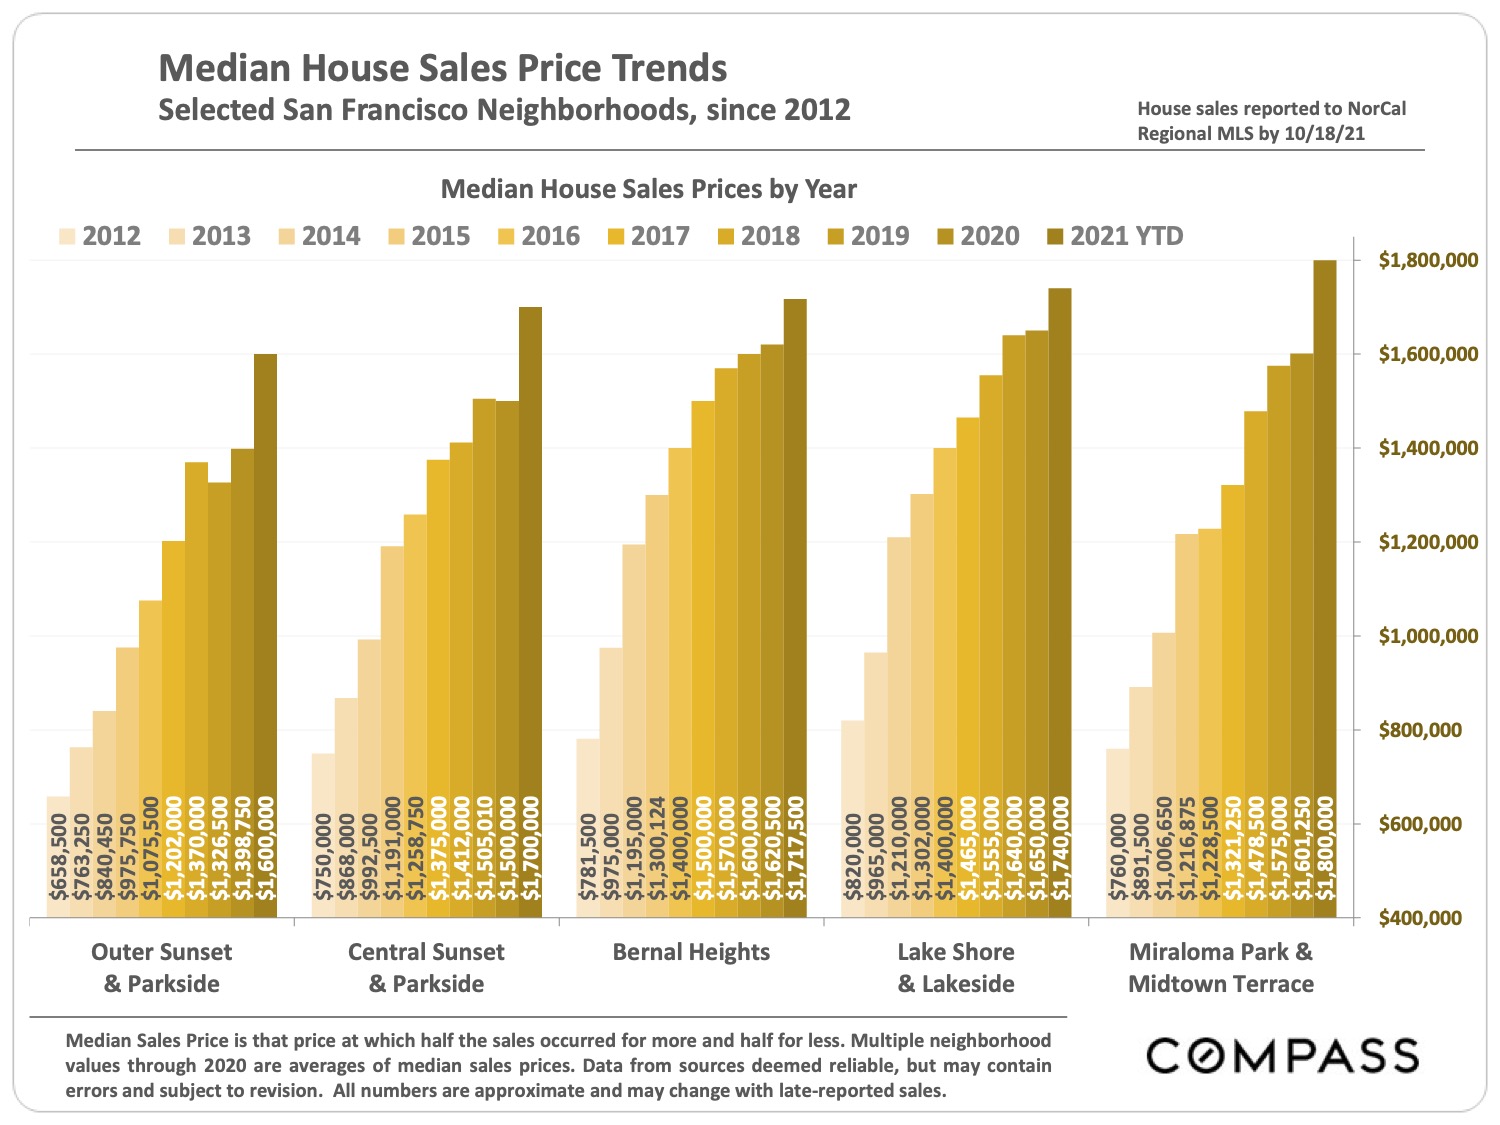 Median House Sales Price Trends Selected San Francisco Neighborhoods since 2012Outer Sunset and Parkside Group page 8 of San Francisco Real Estate Market Report November 2021